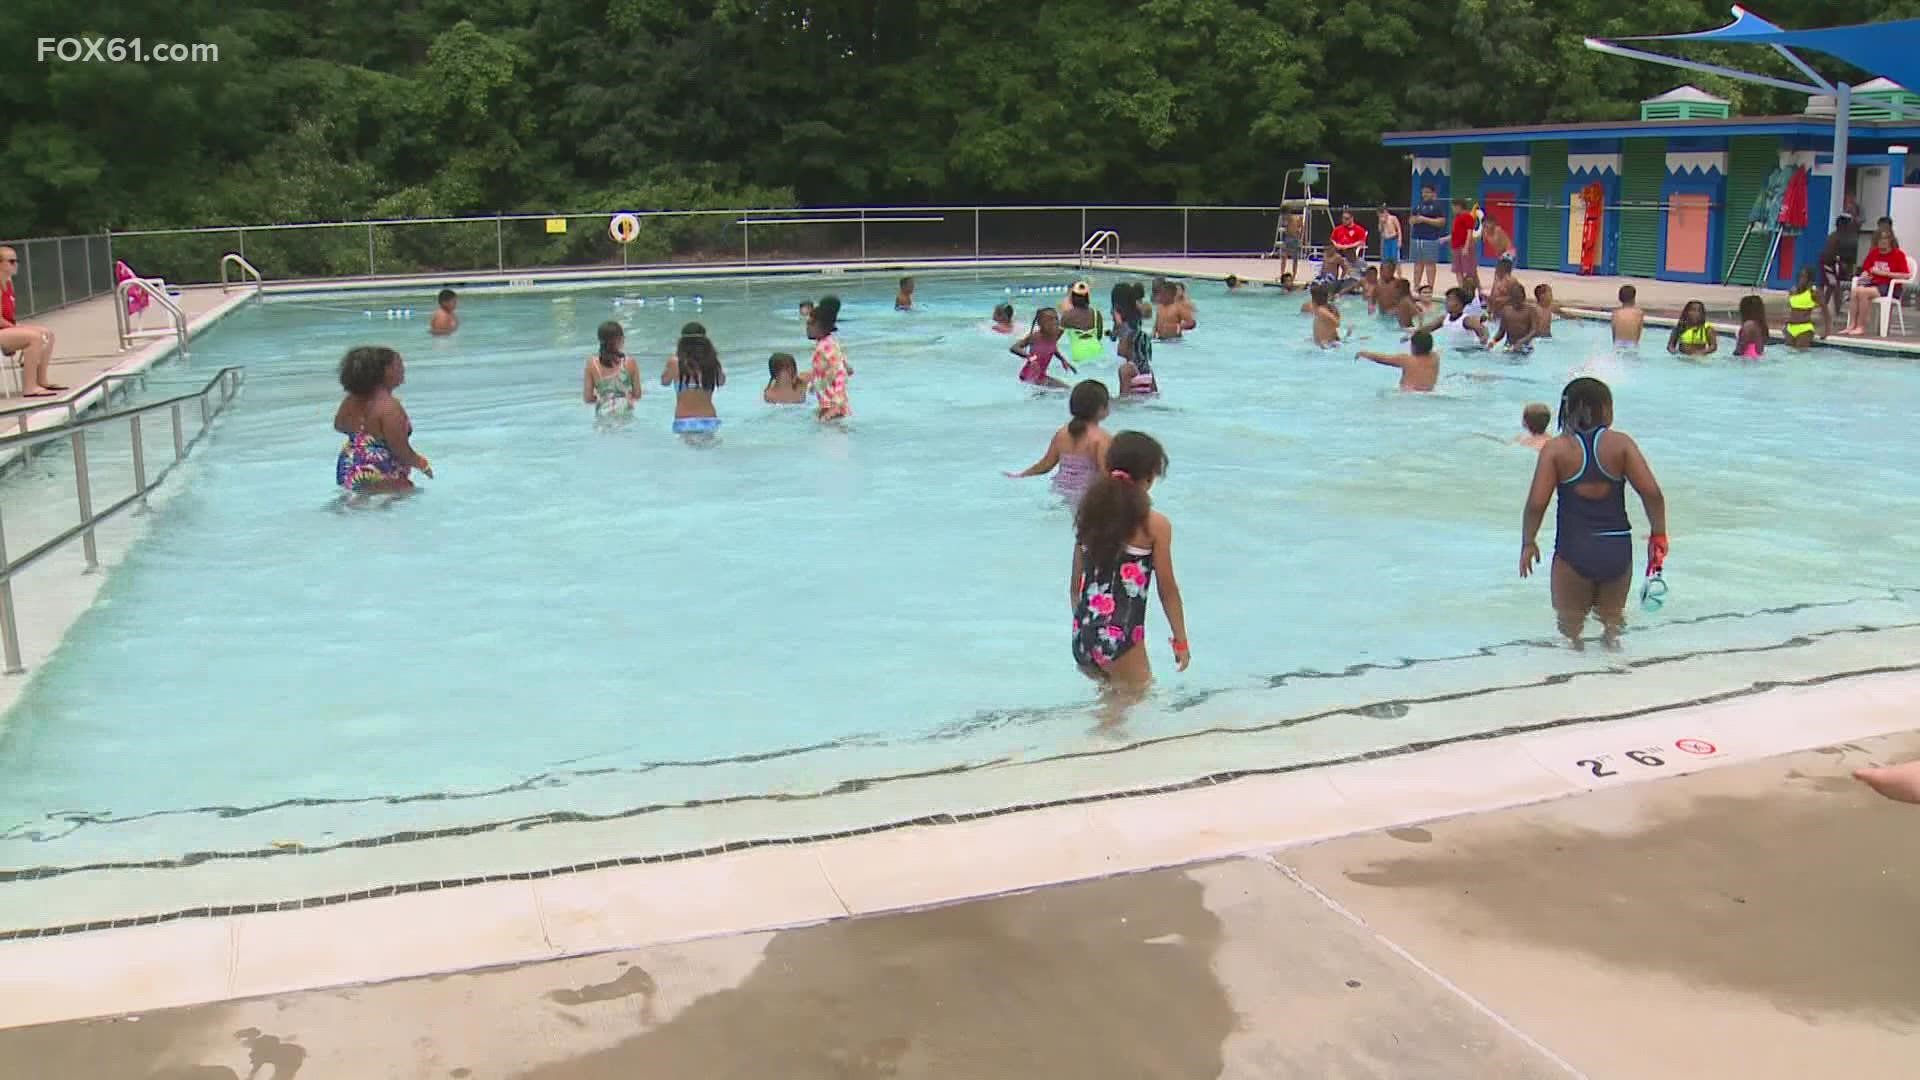 Connecticut is preparing for its first summer heat wave as temperatures this week are expected to reach near 100 degrees.